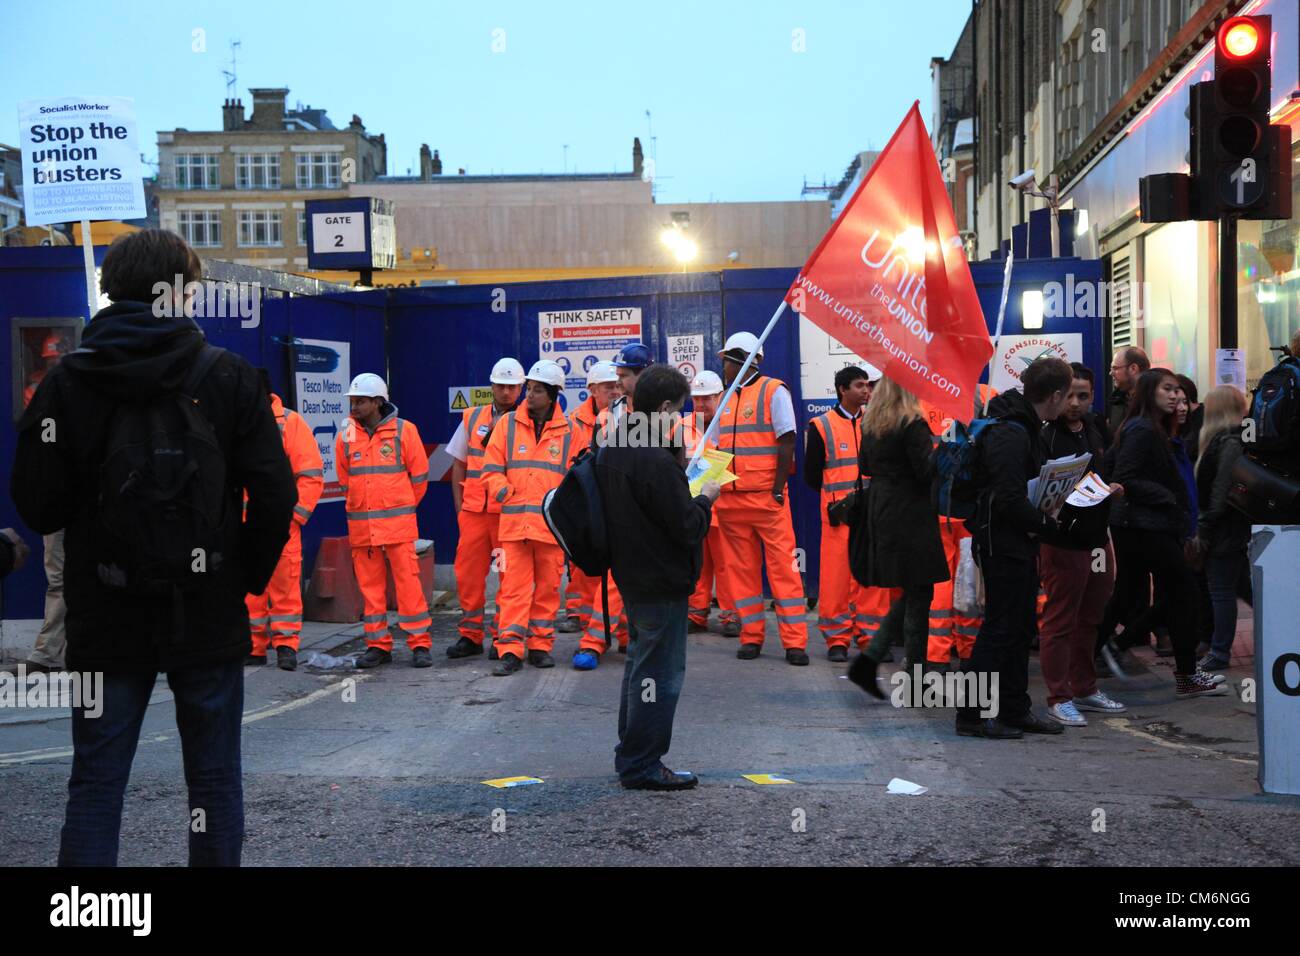 London, UK. 17th October 2012  A group of protestors blocked off a junction on Oxford Street, close to a Cross Rail work site. They were protesting against what they say are union victimization and blacklisting for the workers. Stock Photo